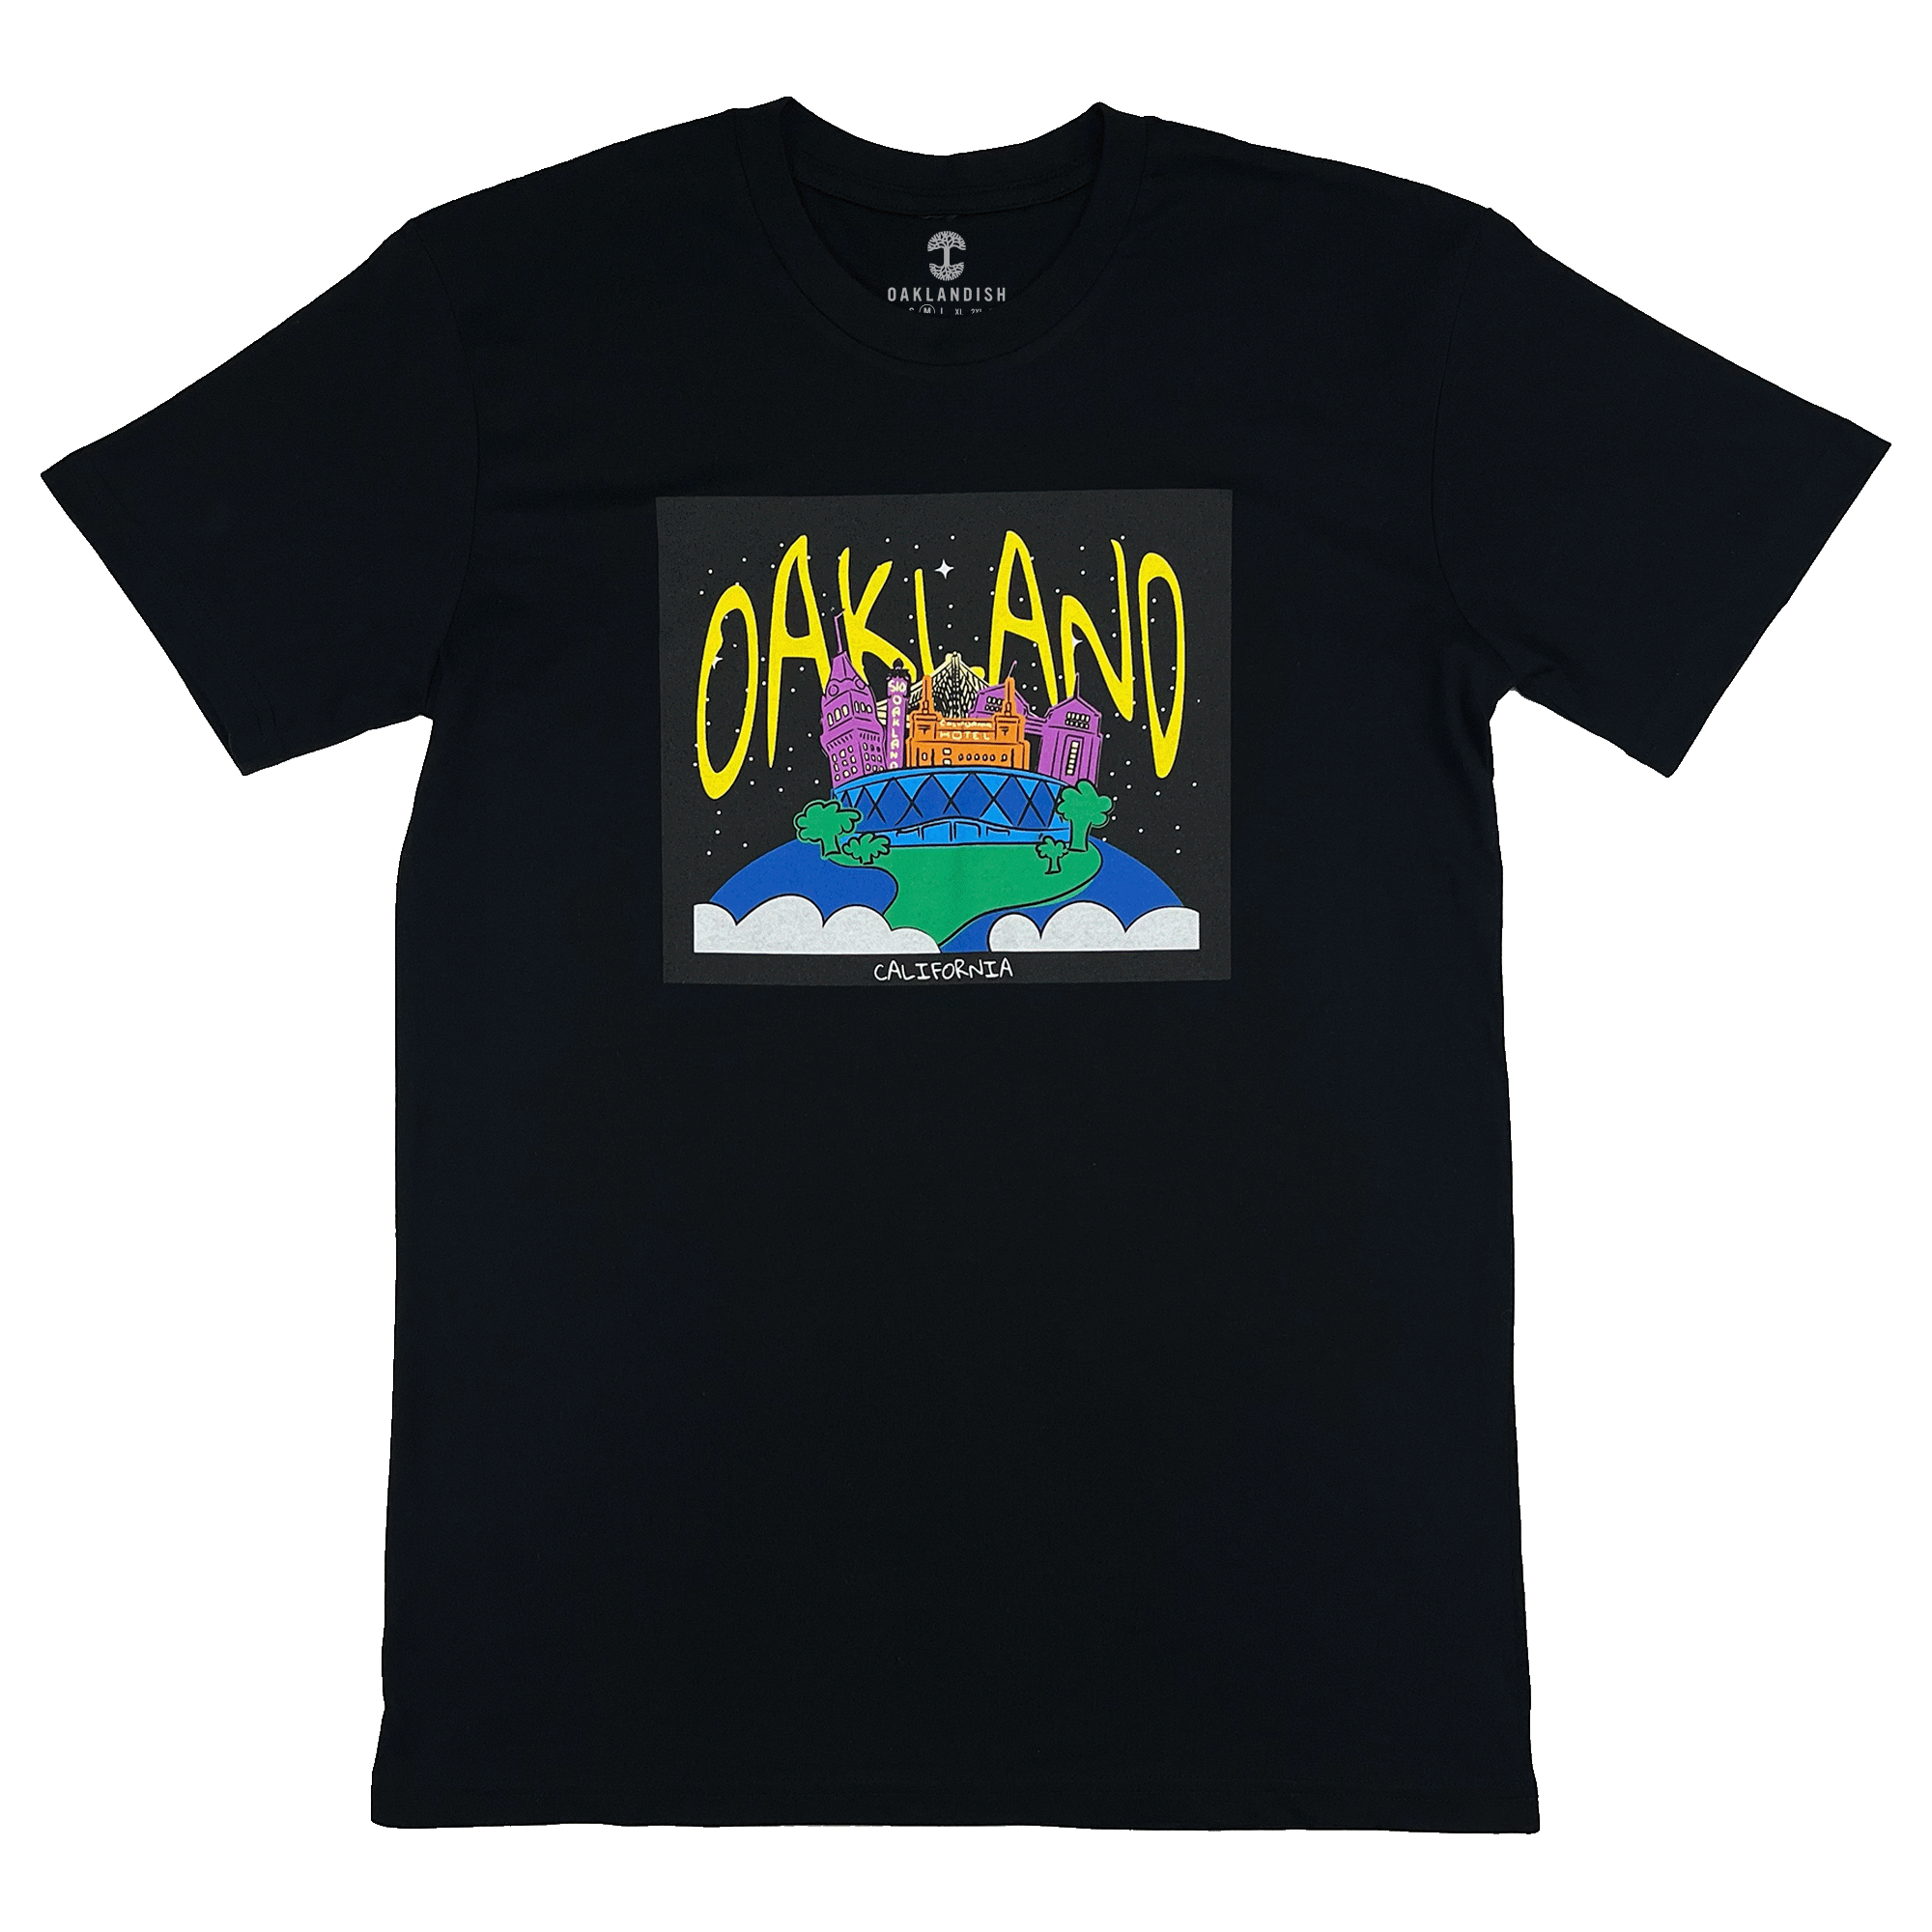 Graphic depicting Oakland places depicted as full-color celestial spaces on a black t-shirt.